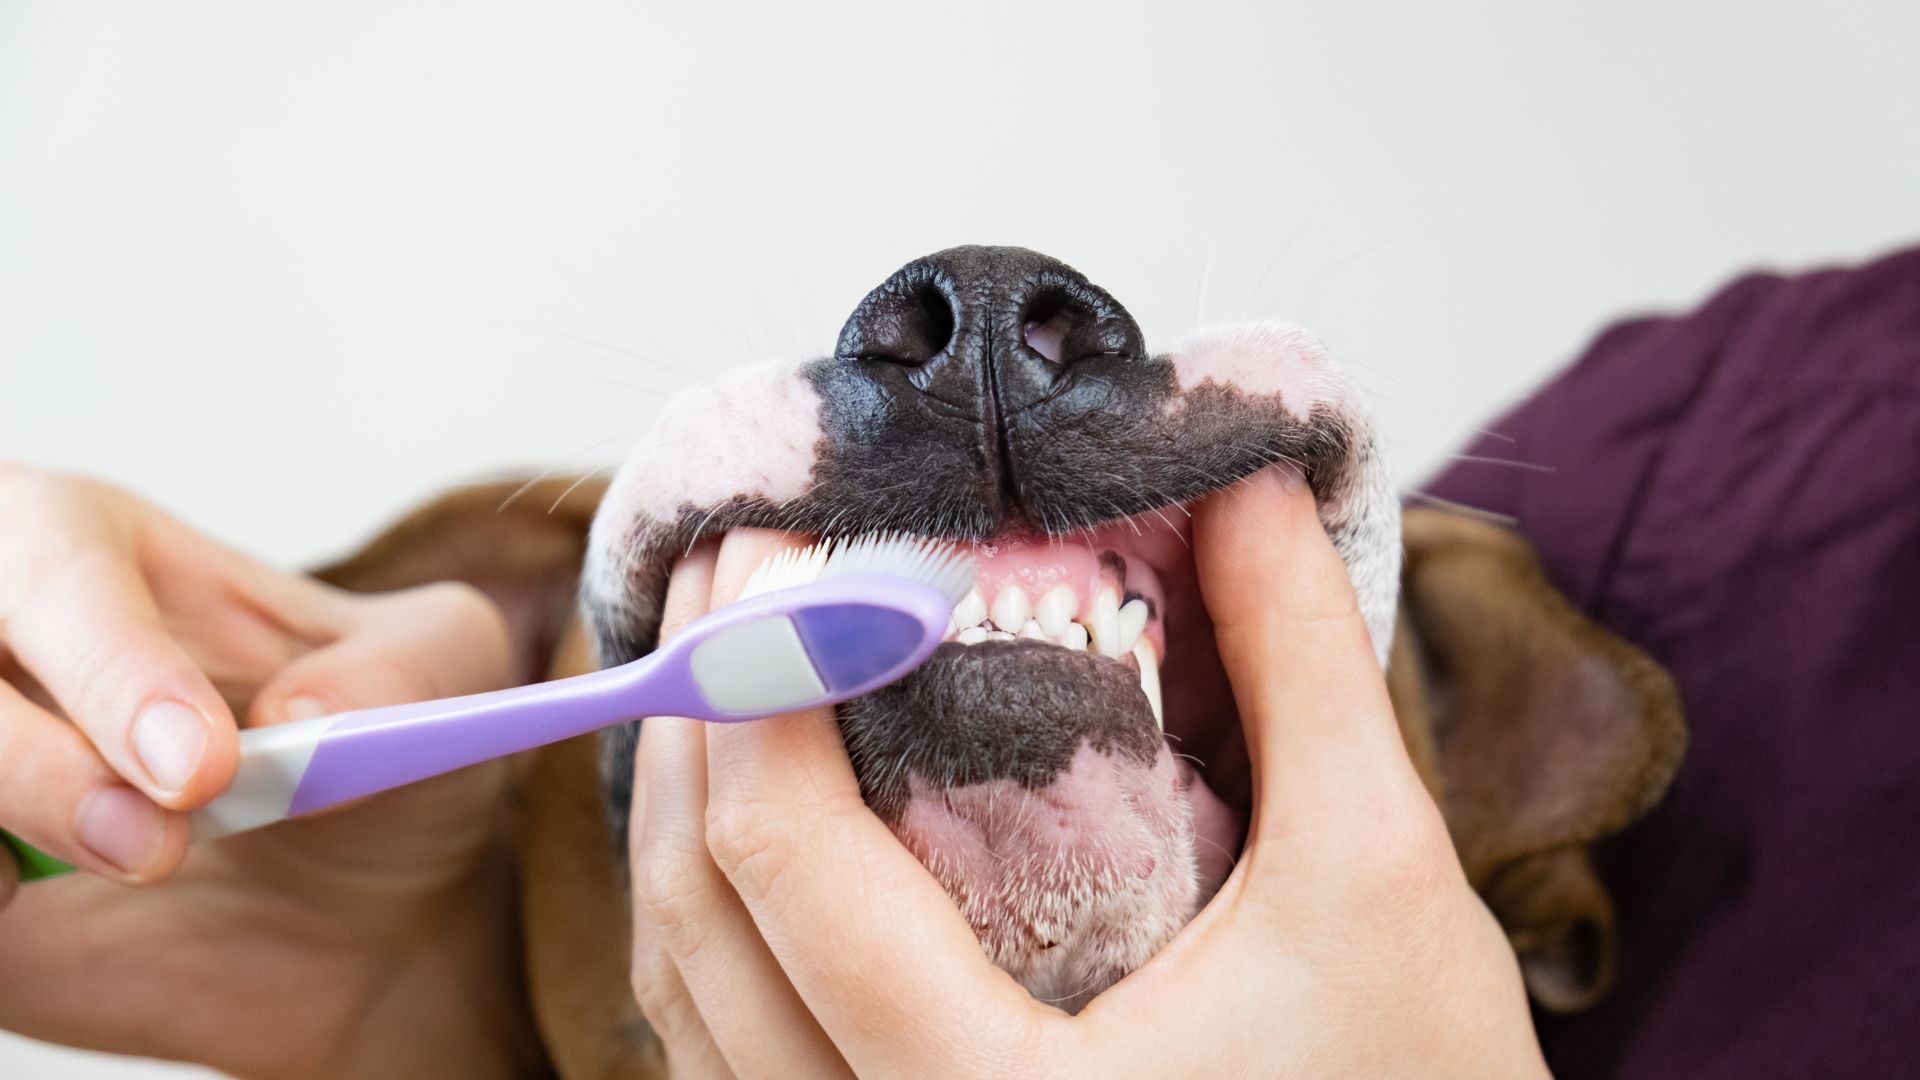 vet cleaning dogs teeth